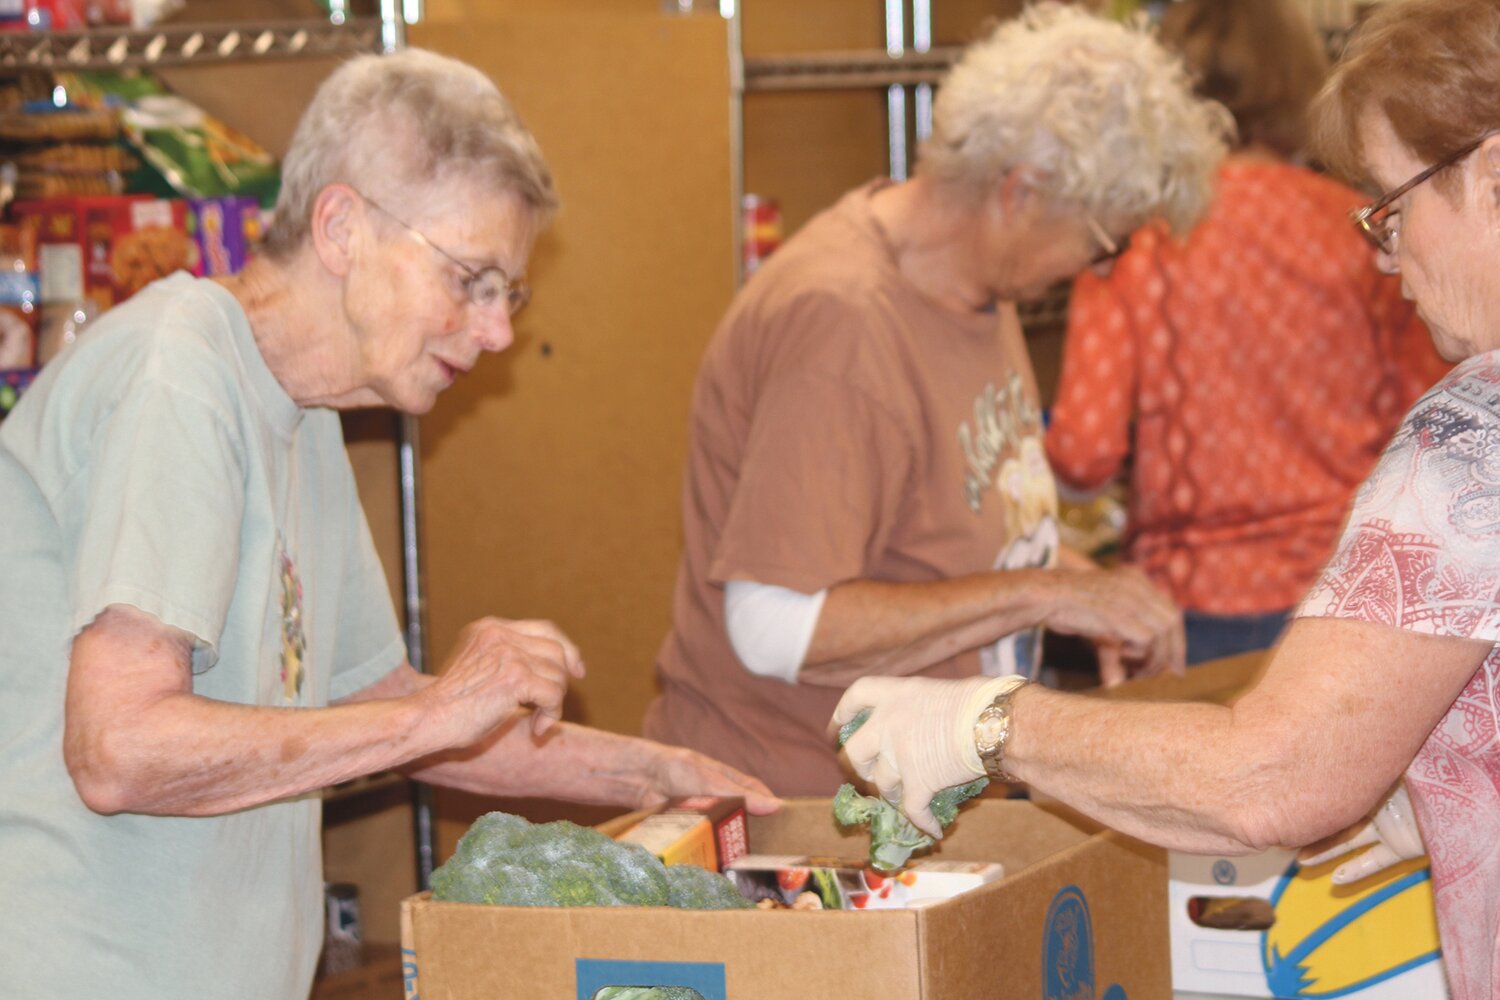 Matthew Ockinga/LCM
Volunteers at the Lake Chelan Food Bank place fresh vegetables into to-go boxes on July 2. Each family receives one box containing 40-50 pounds of food.